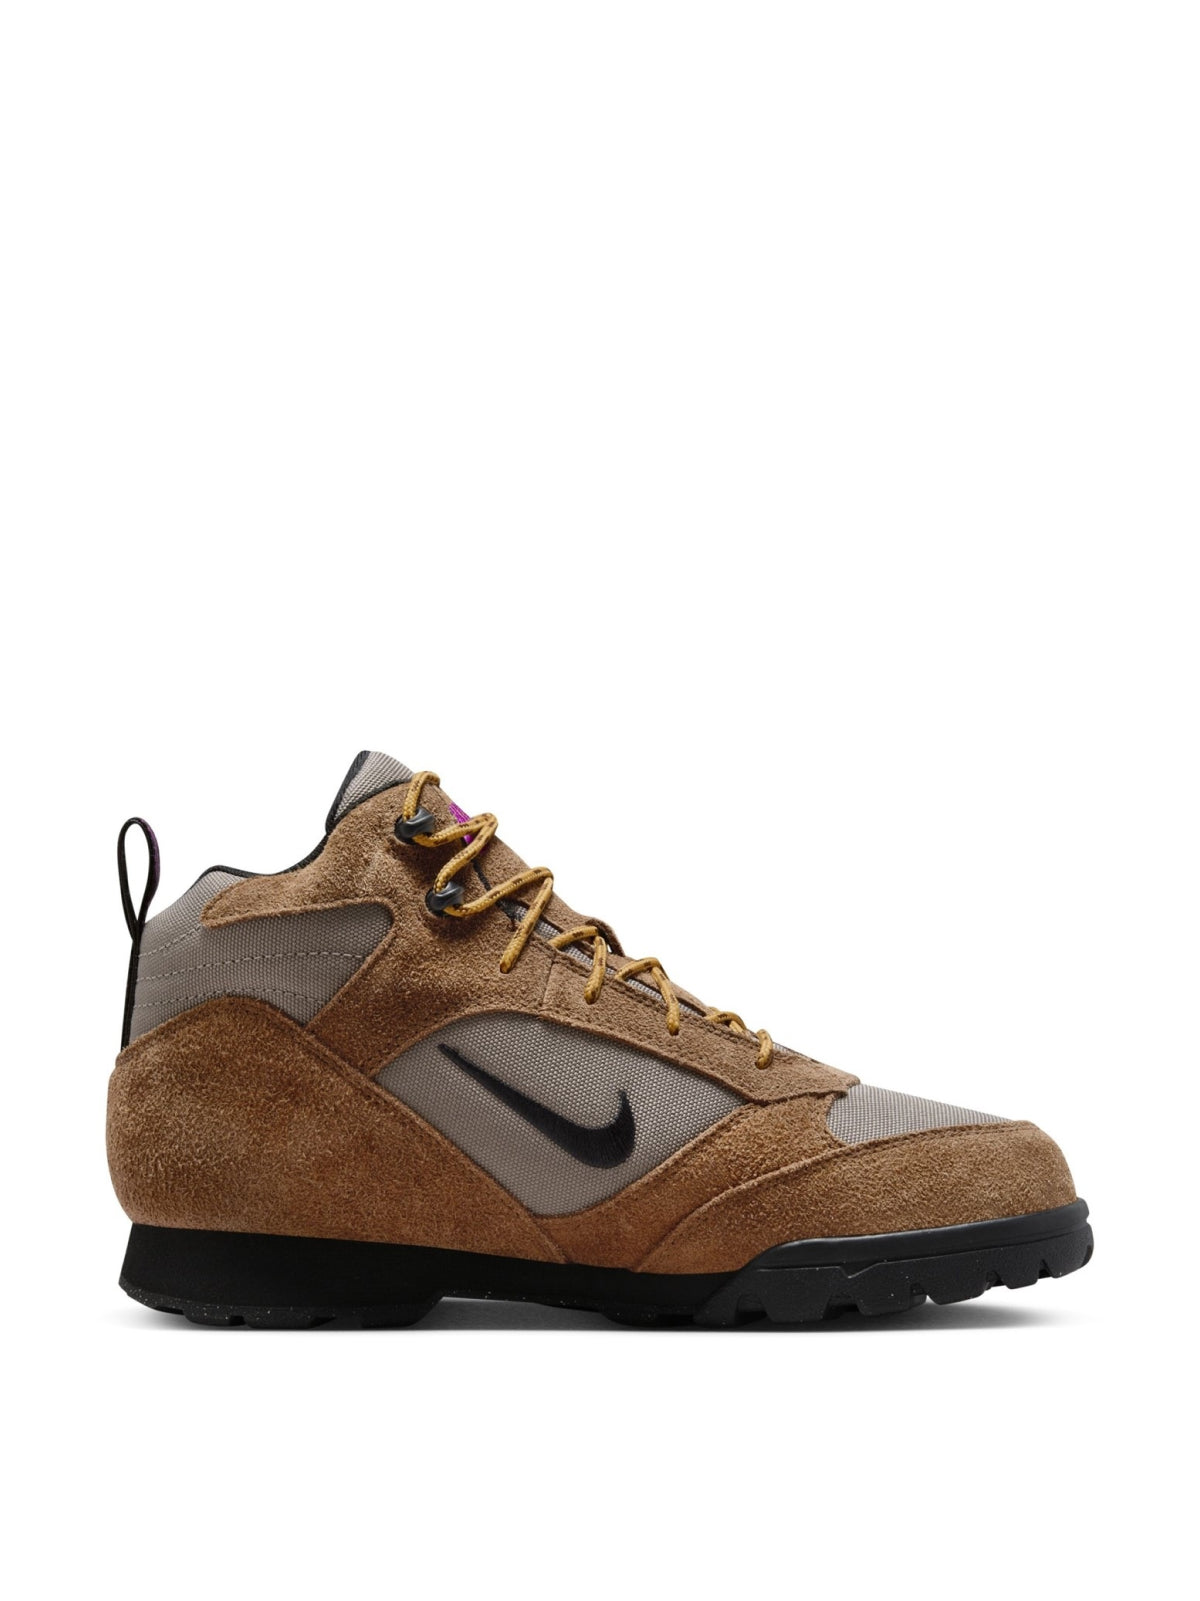 Nike-OUTLET-SALE-ACG Torre Mid WP Sneakers-ARCHIVIST